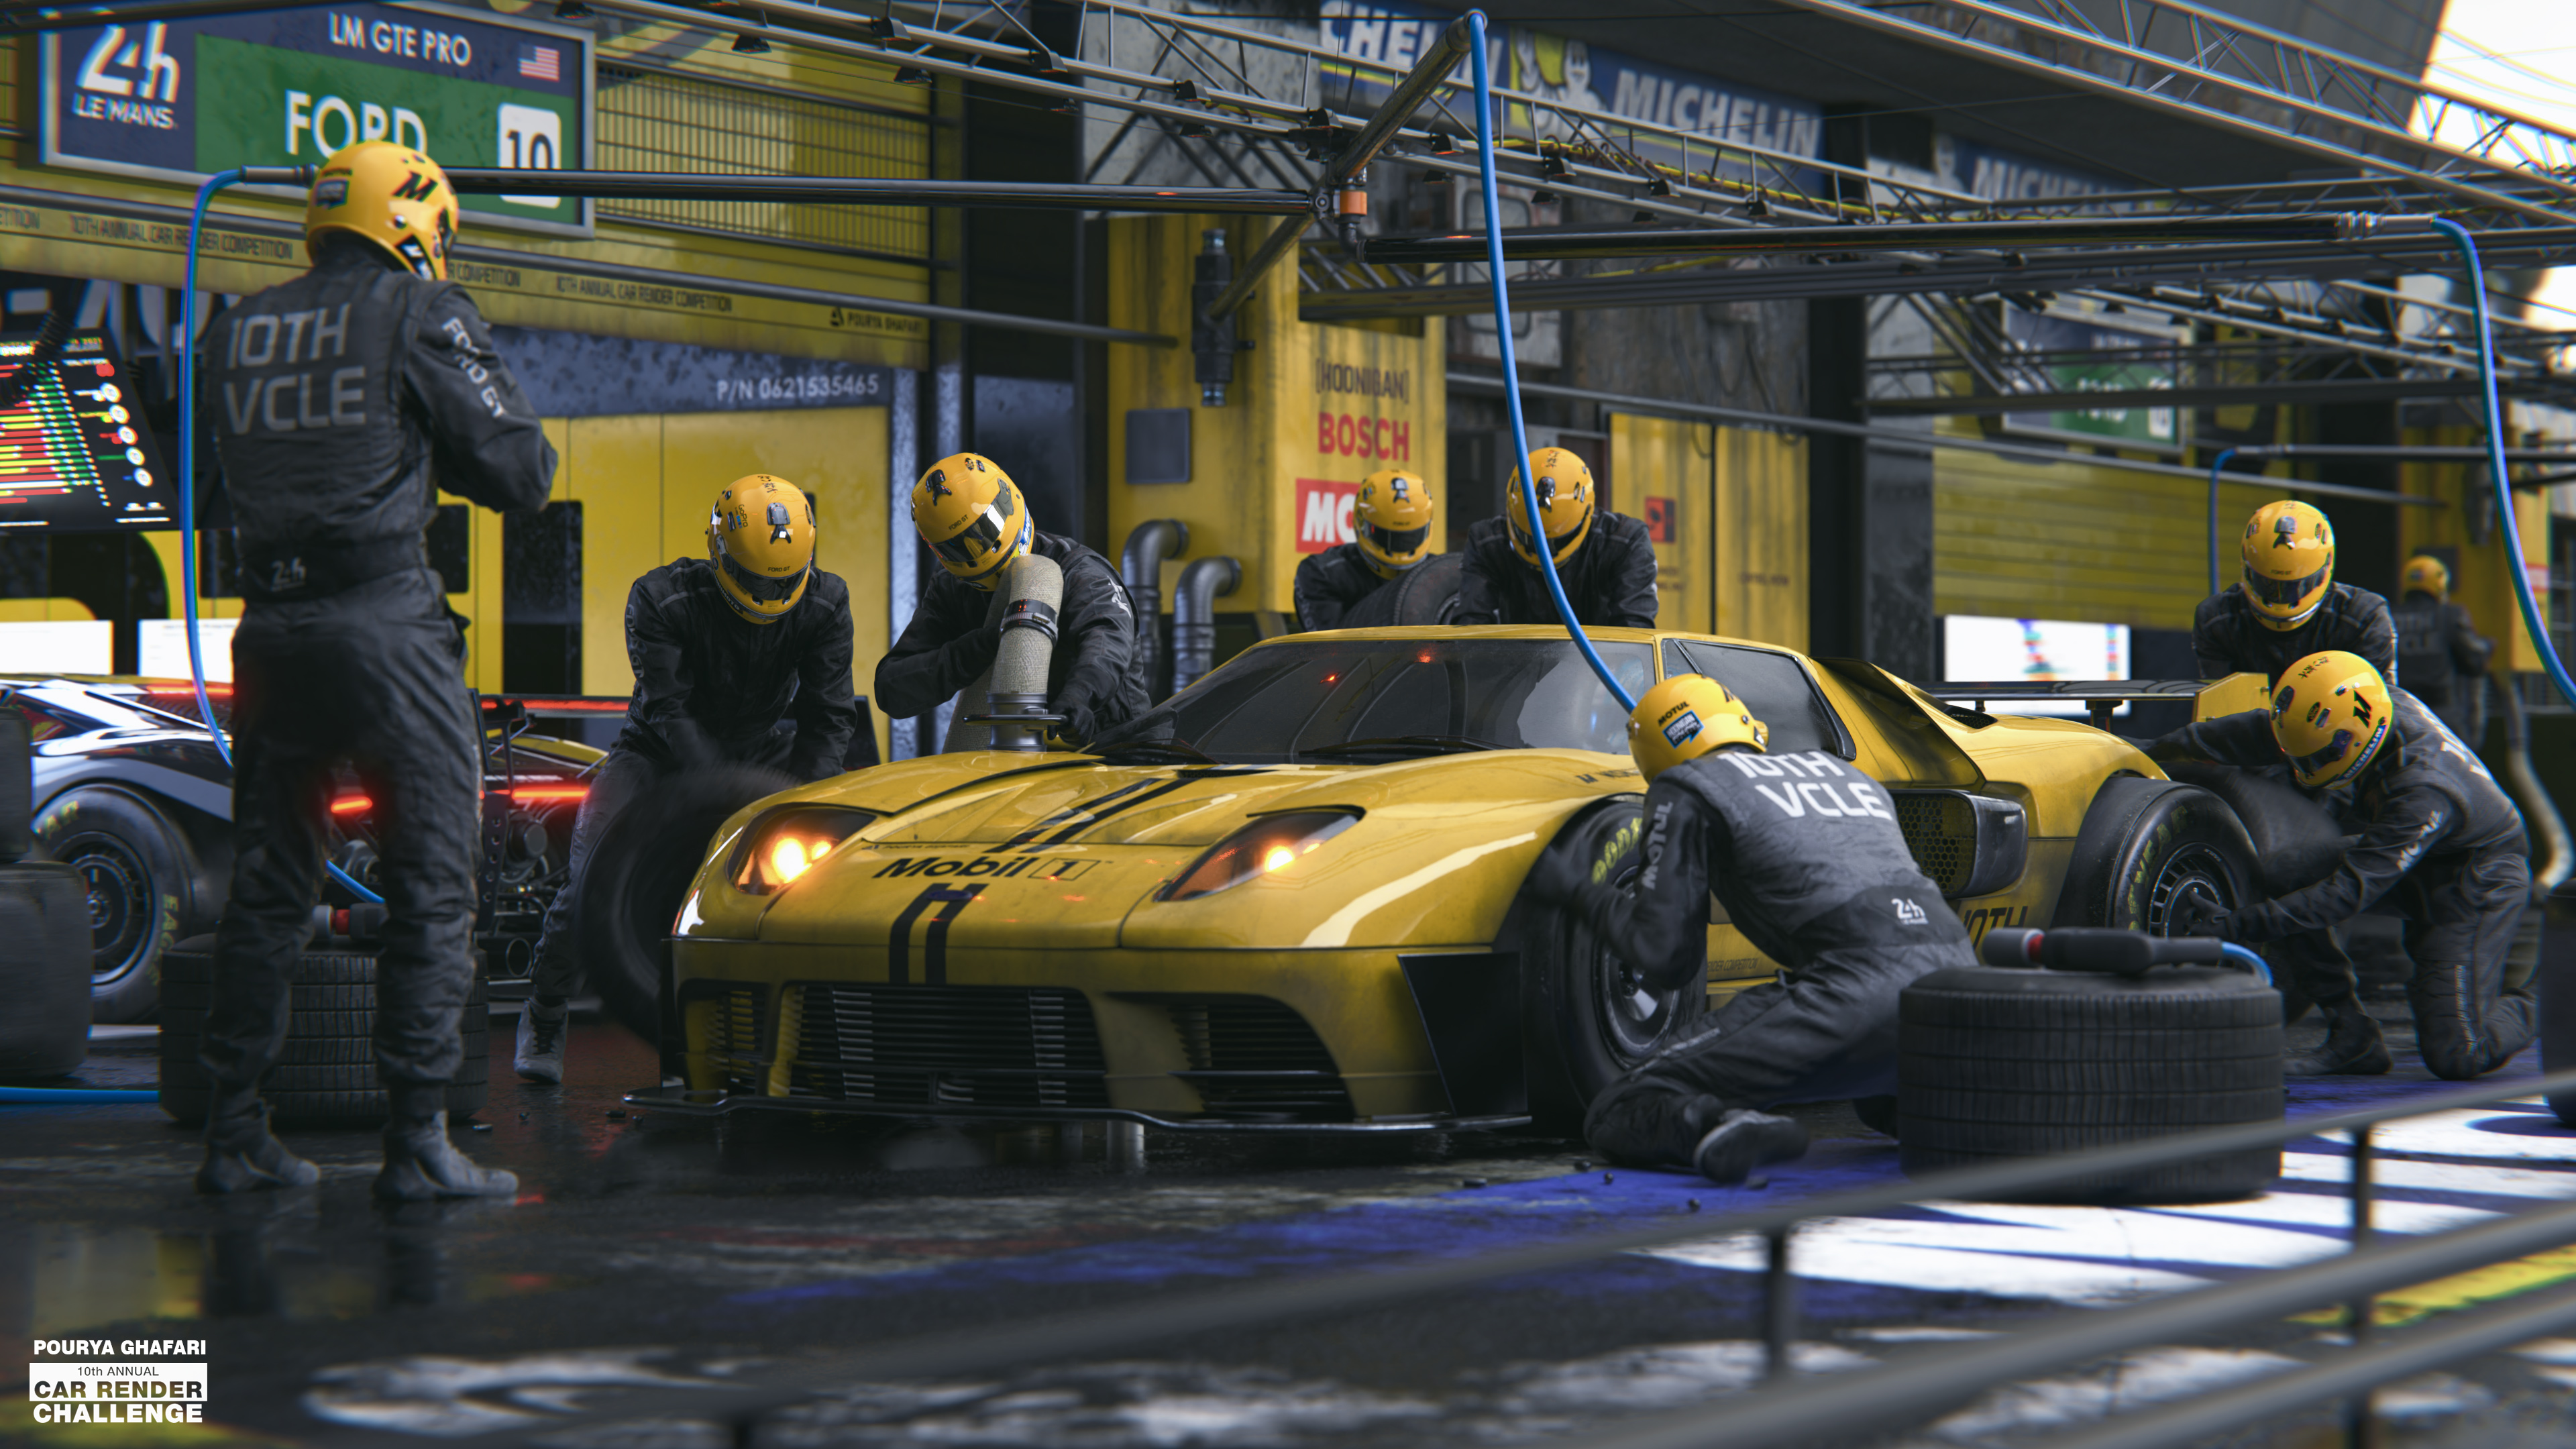 Third place is In the Eye of the Storm: Ford GTs Pit Symphony by Pourya Ghafari